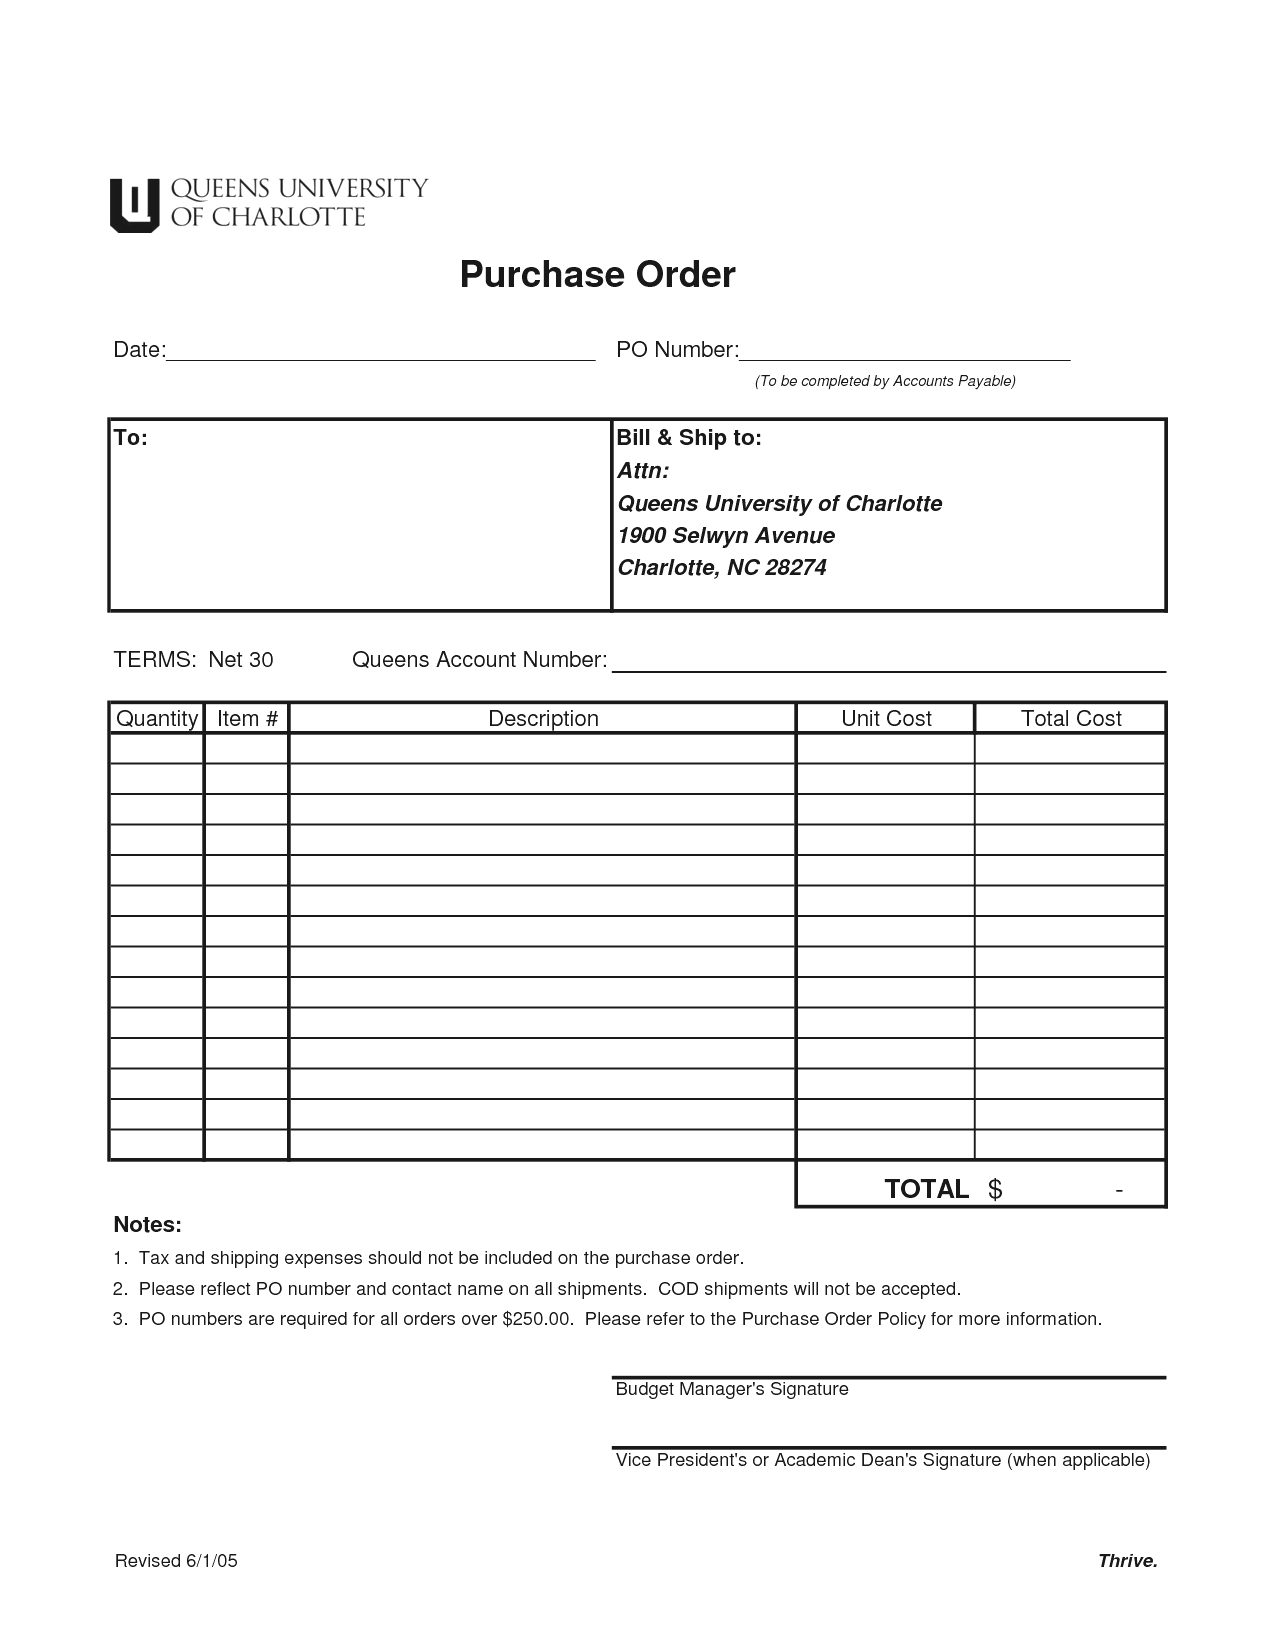 Microsoft Excel Order Form Template from exeagle984.weebly.com